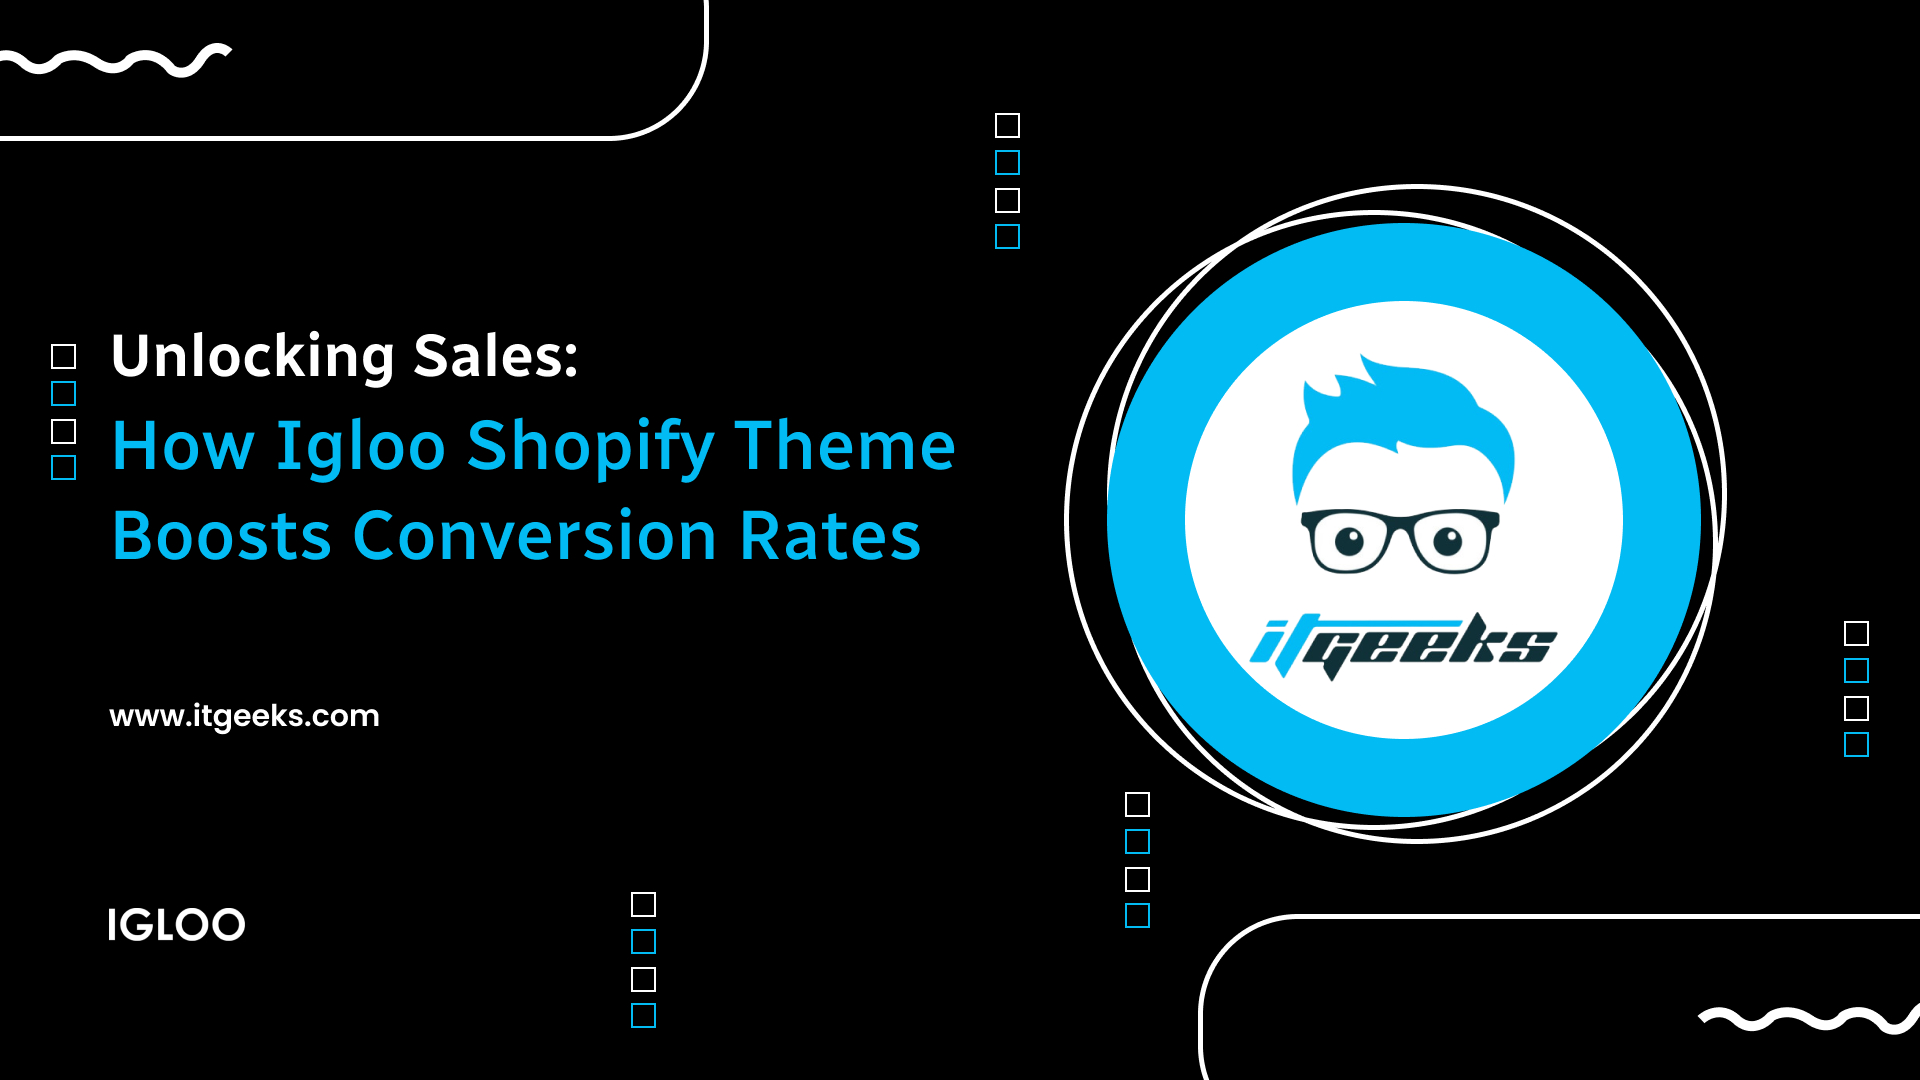 Unlocking Sales: How Igloo Shopify Theme Boosts Conversion Rates